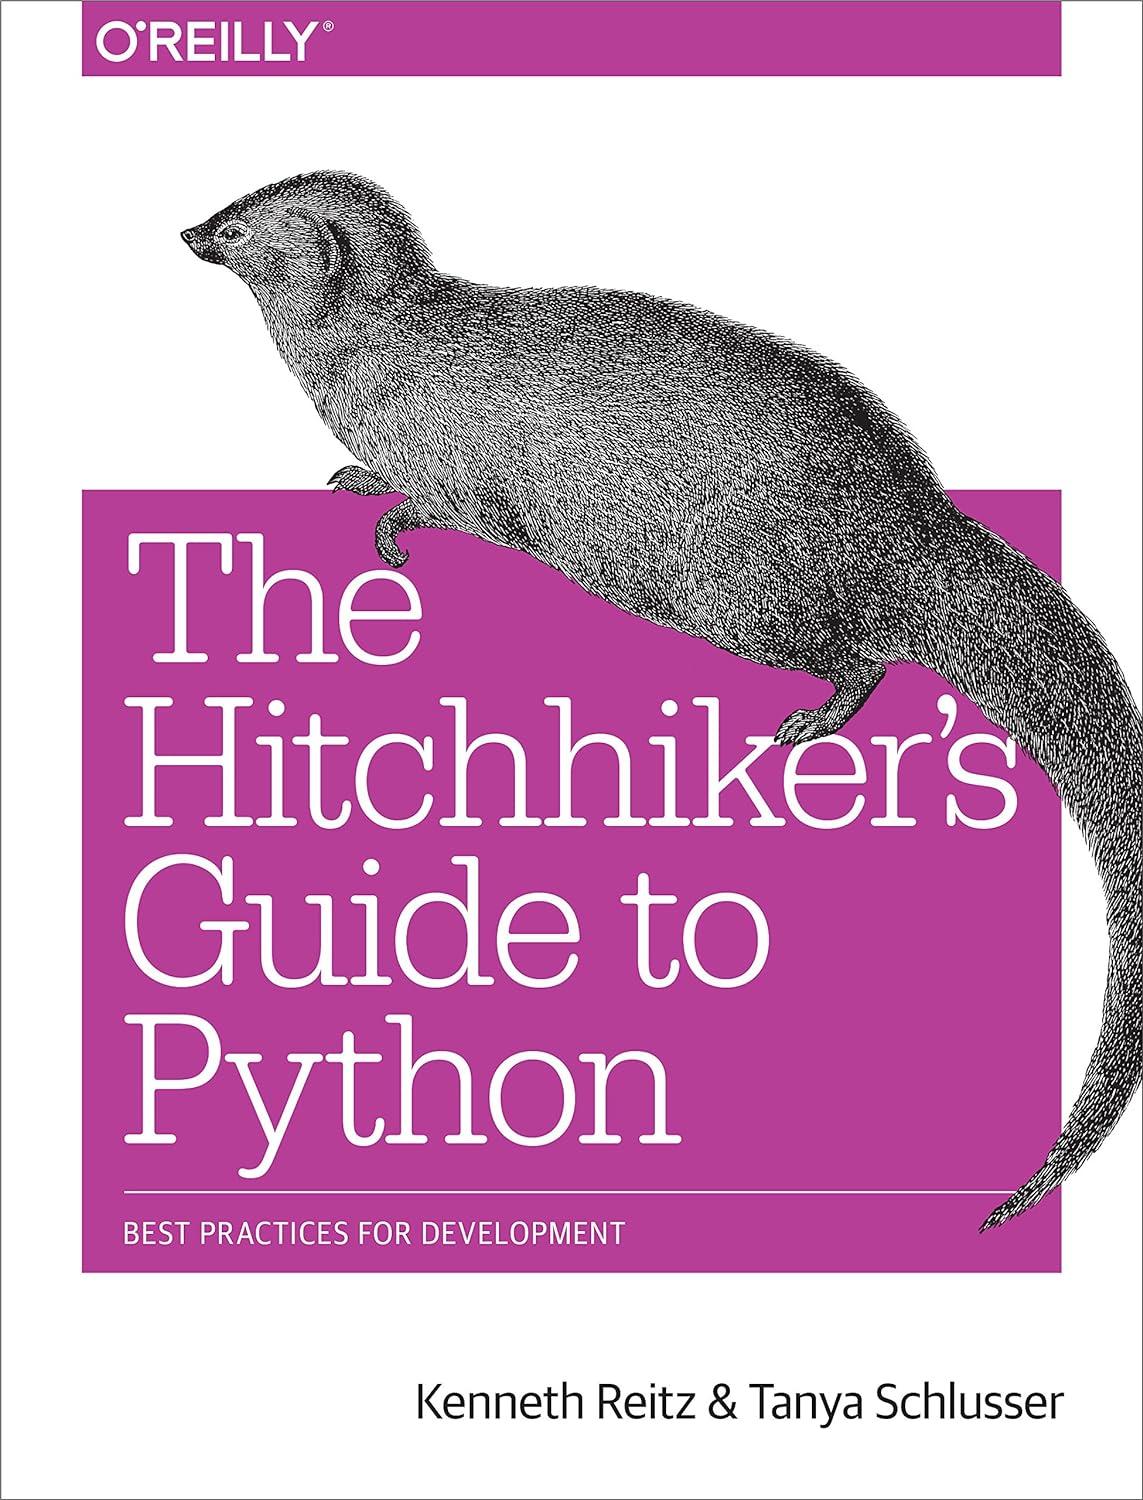 the hitchhiker's guide to python best practices for development 1st edition kenneth reitz, tanya schlusser